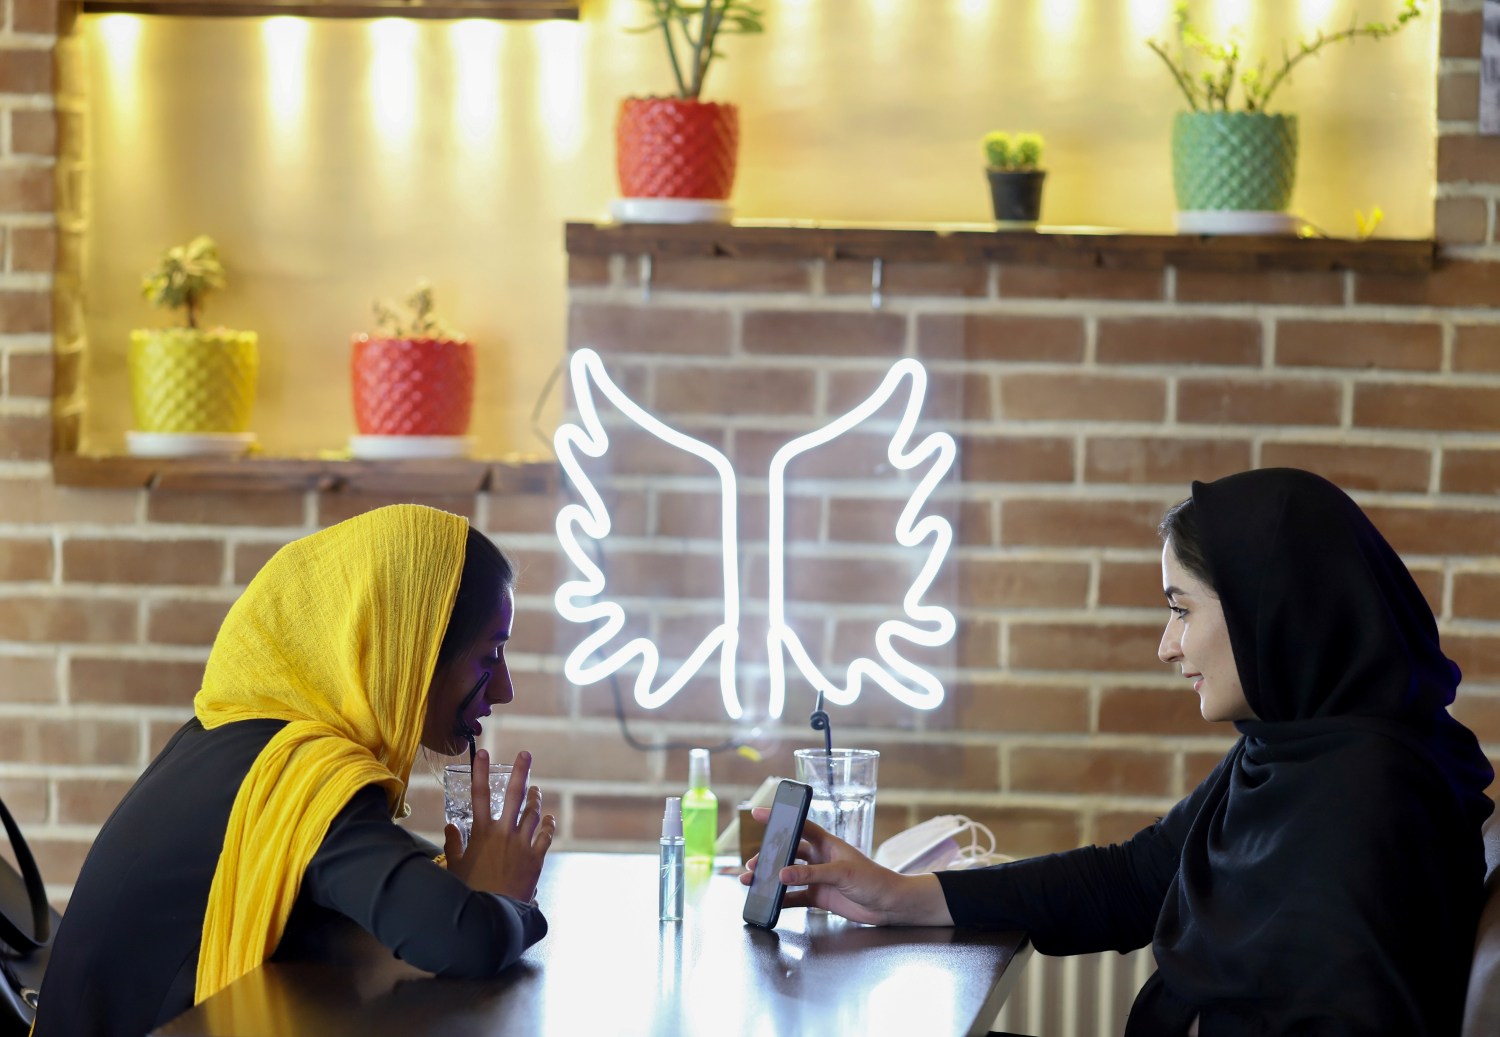 Iranian women sit in a cafe after the launching of the "Hamdam" dating app, in Tehran, Iran, July 17, 2021. Picture taken July 17, 2021. Majid Asgaripour/WANA (West Asia News Agency) via REUTERS ATTENTION EDITORS - THIS IMAGE HAS BEEN SUPPLIED BY A THIRD PARTY.